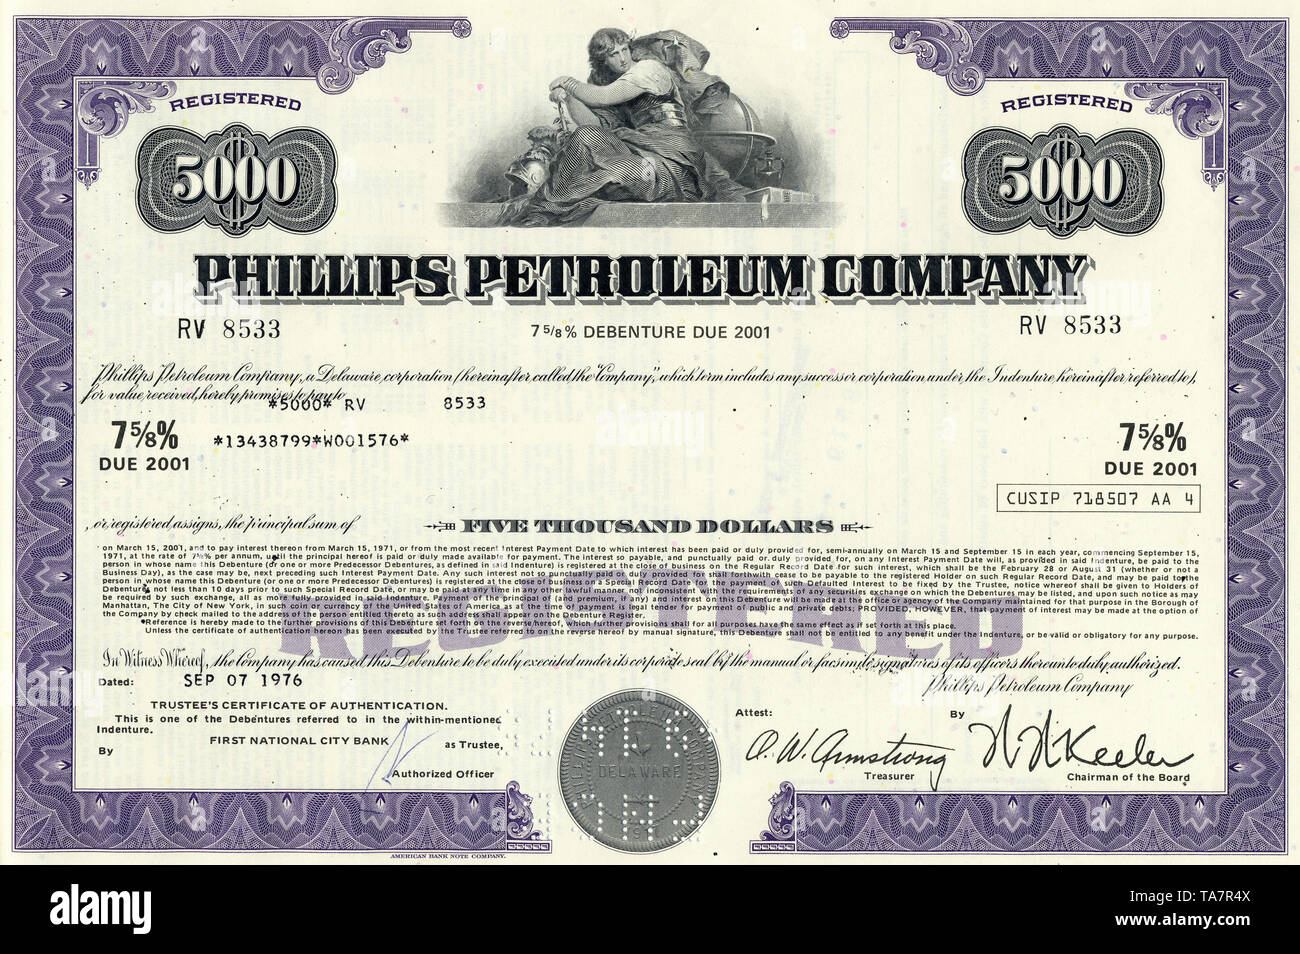 Historical stock certificate of an oil, gas and energy company, Phillips Petroleum Company, today part of ConocoPhillips, Oklahoma, USA, 1976, Wertpapier, historische Aktie, Mineralöl- und Erdgasunternehmen,  Energieunternehmen, Phillips Petroleum Company, 1976,  heute ein Teil von ConocoPhillips, Oklahoma, USA Stock Photo